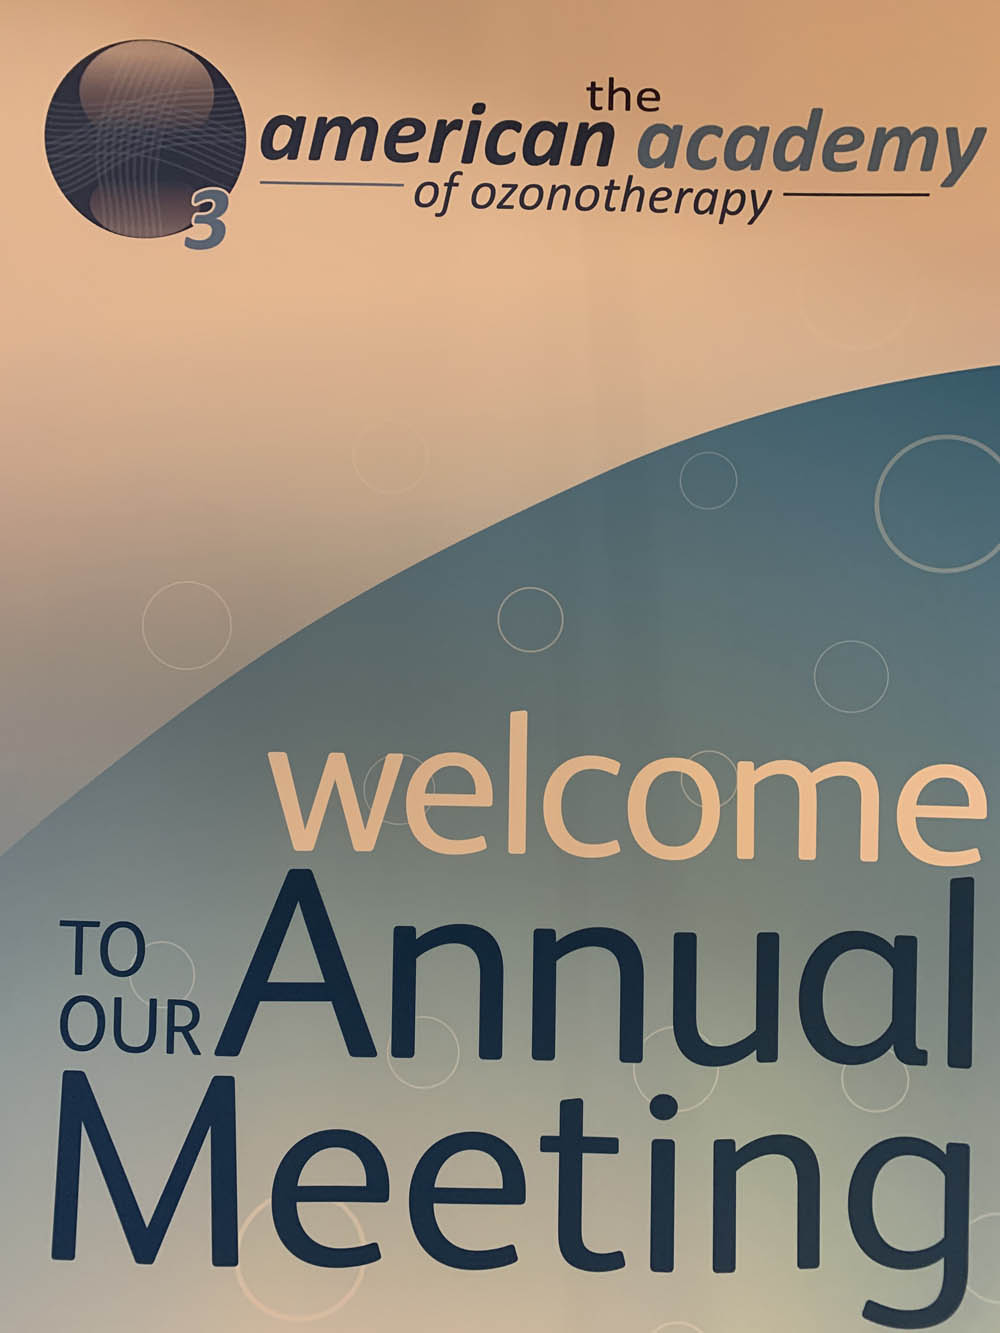 Dr. Fred Arnold attends the 9th Annual American Association of Ozonotherapy Meeting